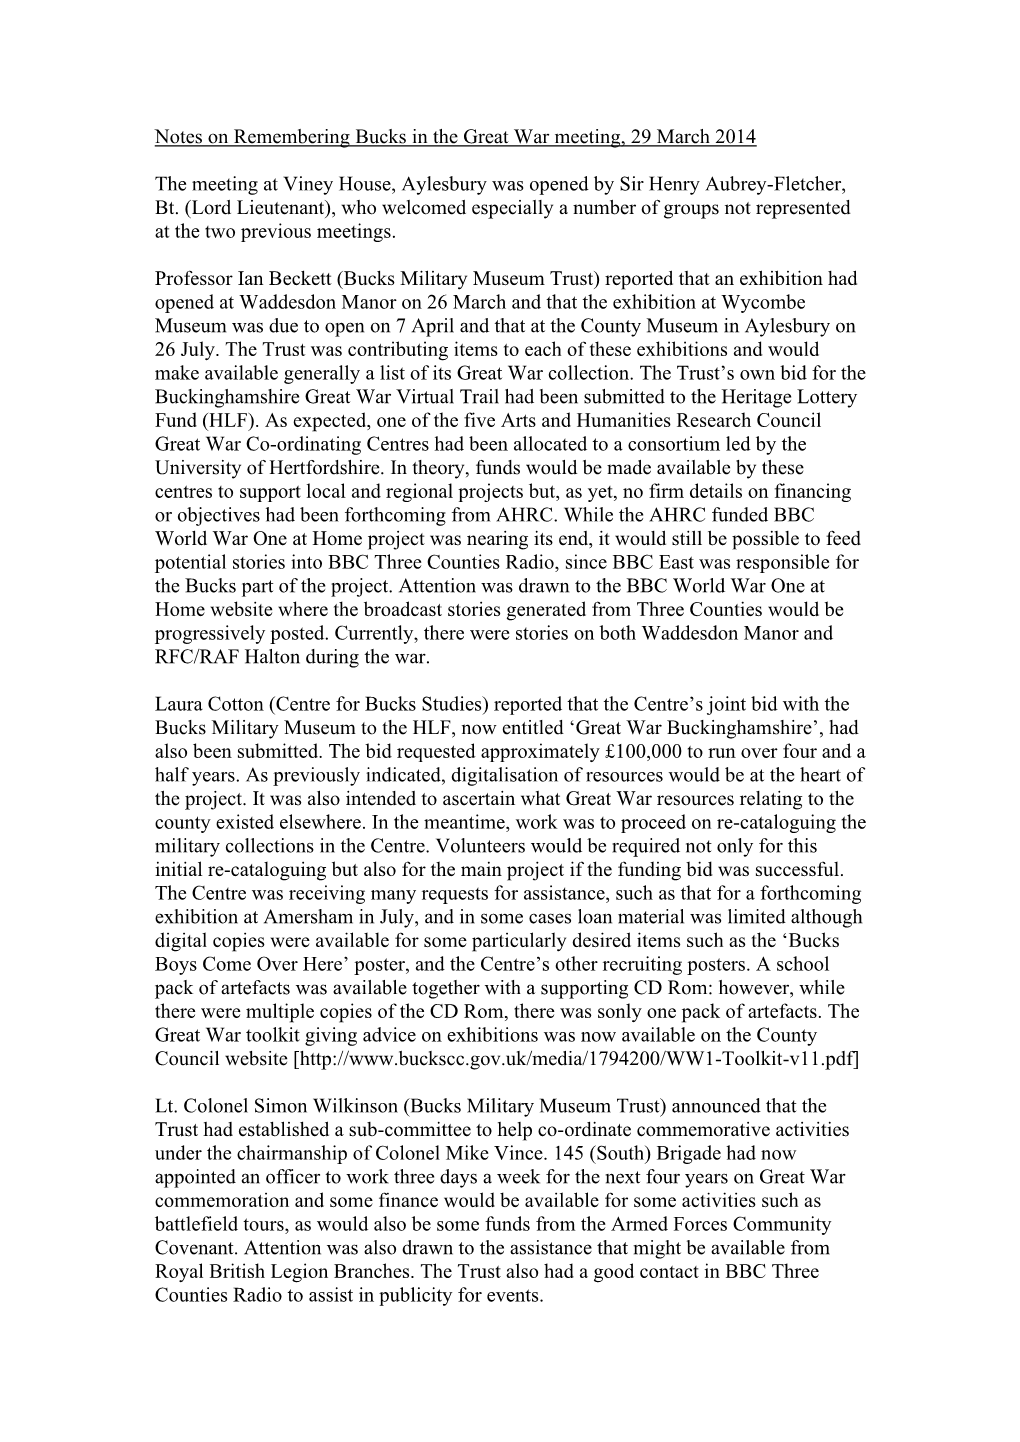 Notes on Remembering Bucks in the Great War Meeting, 29 March 2014